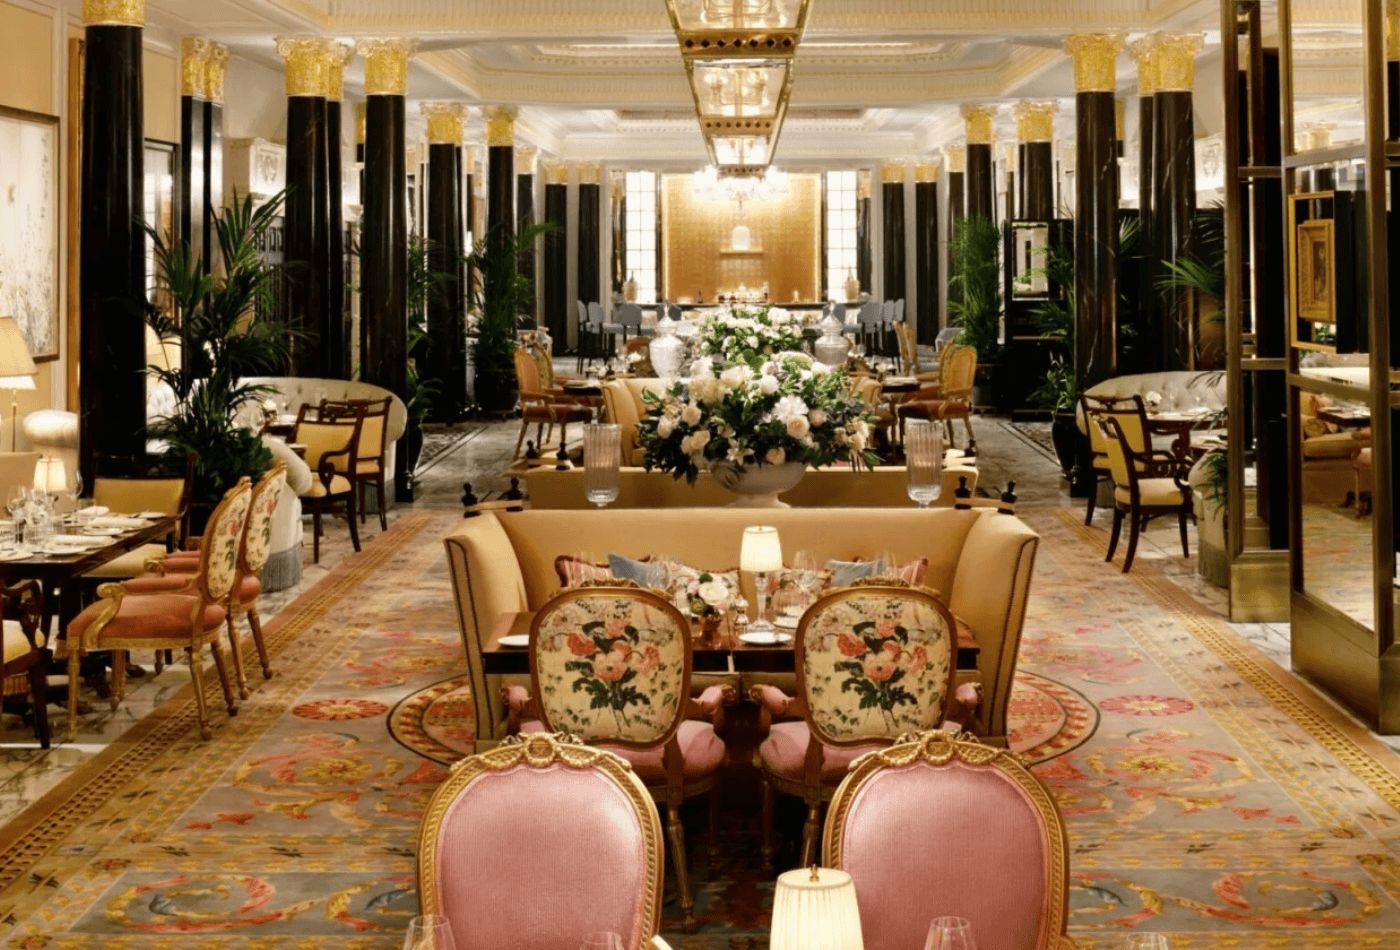 Traditional lounge area with black pillars and golden and pink theme